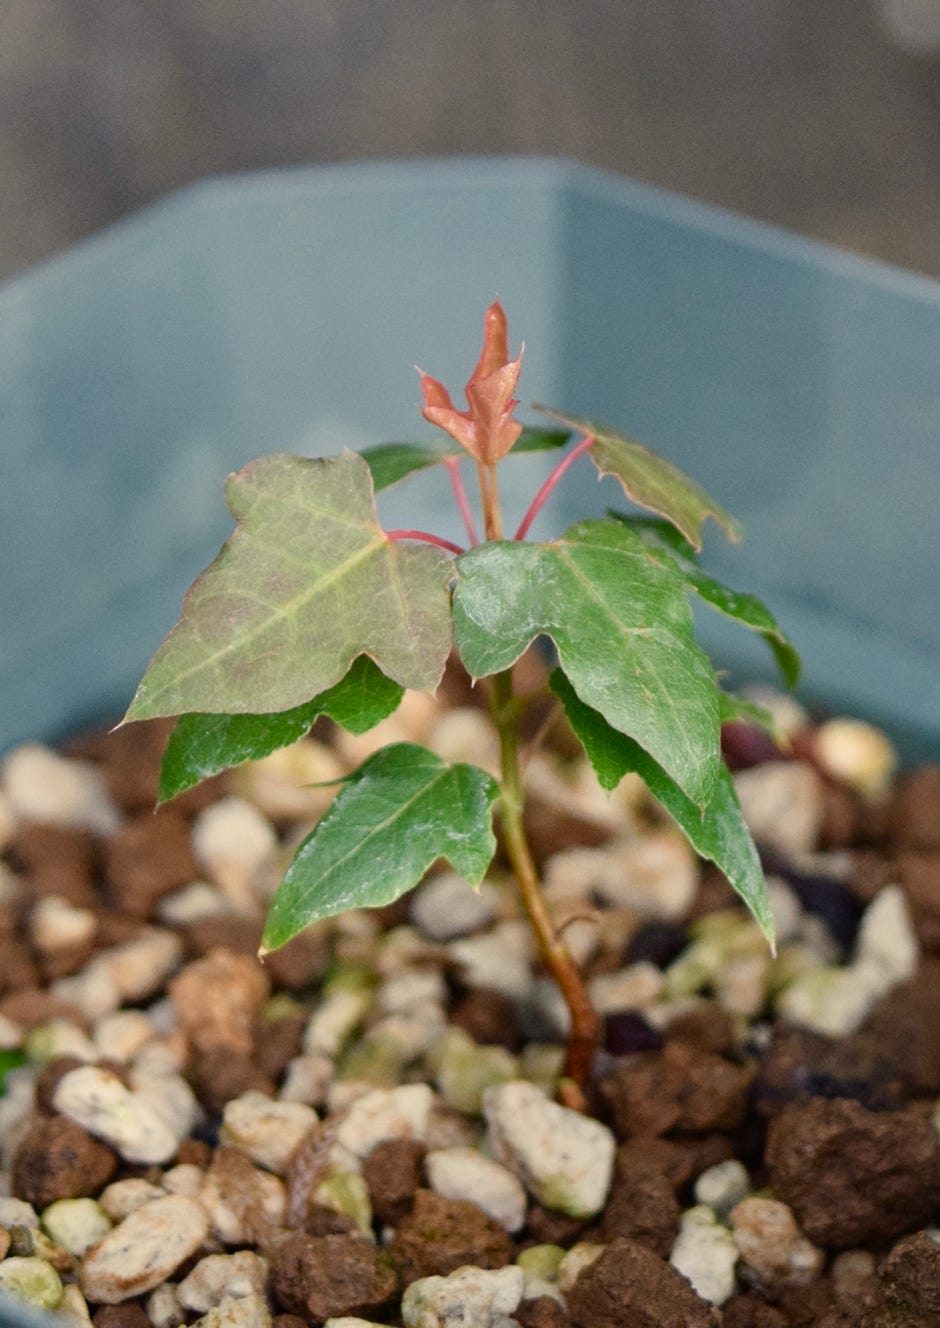 Acer truncatum Shantung Shandong maple dwarf seedling from a dwarf tiny small leaves